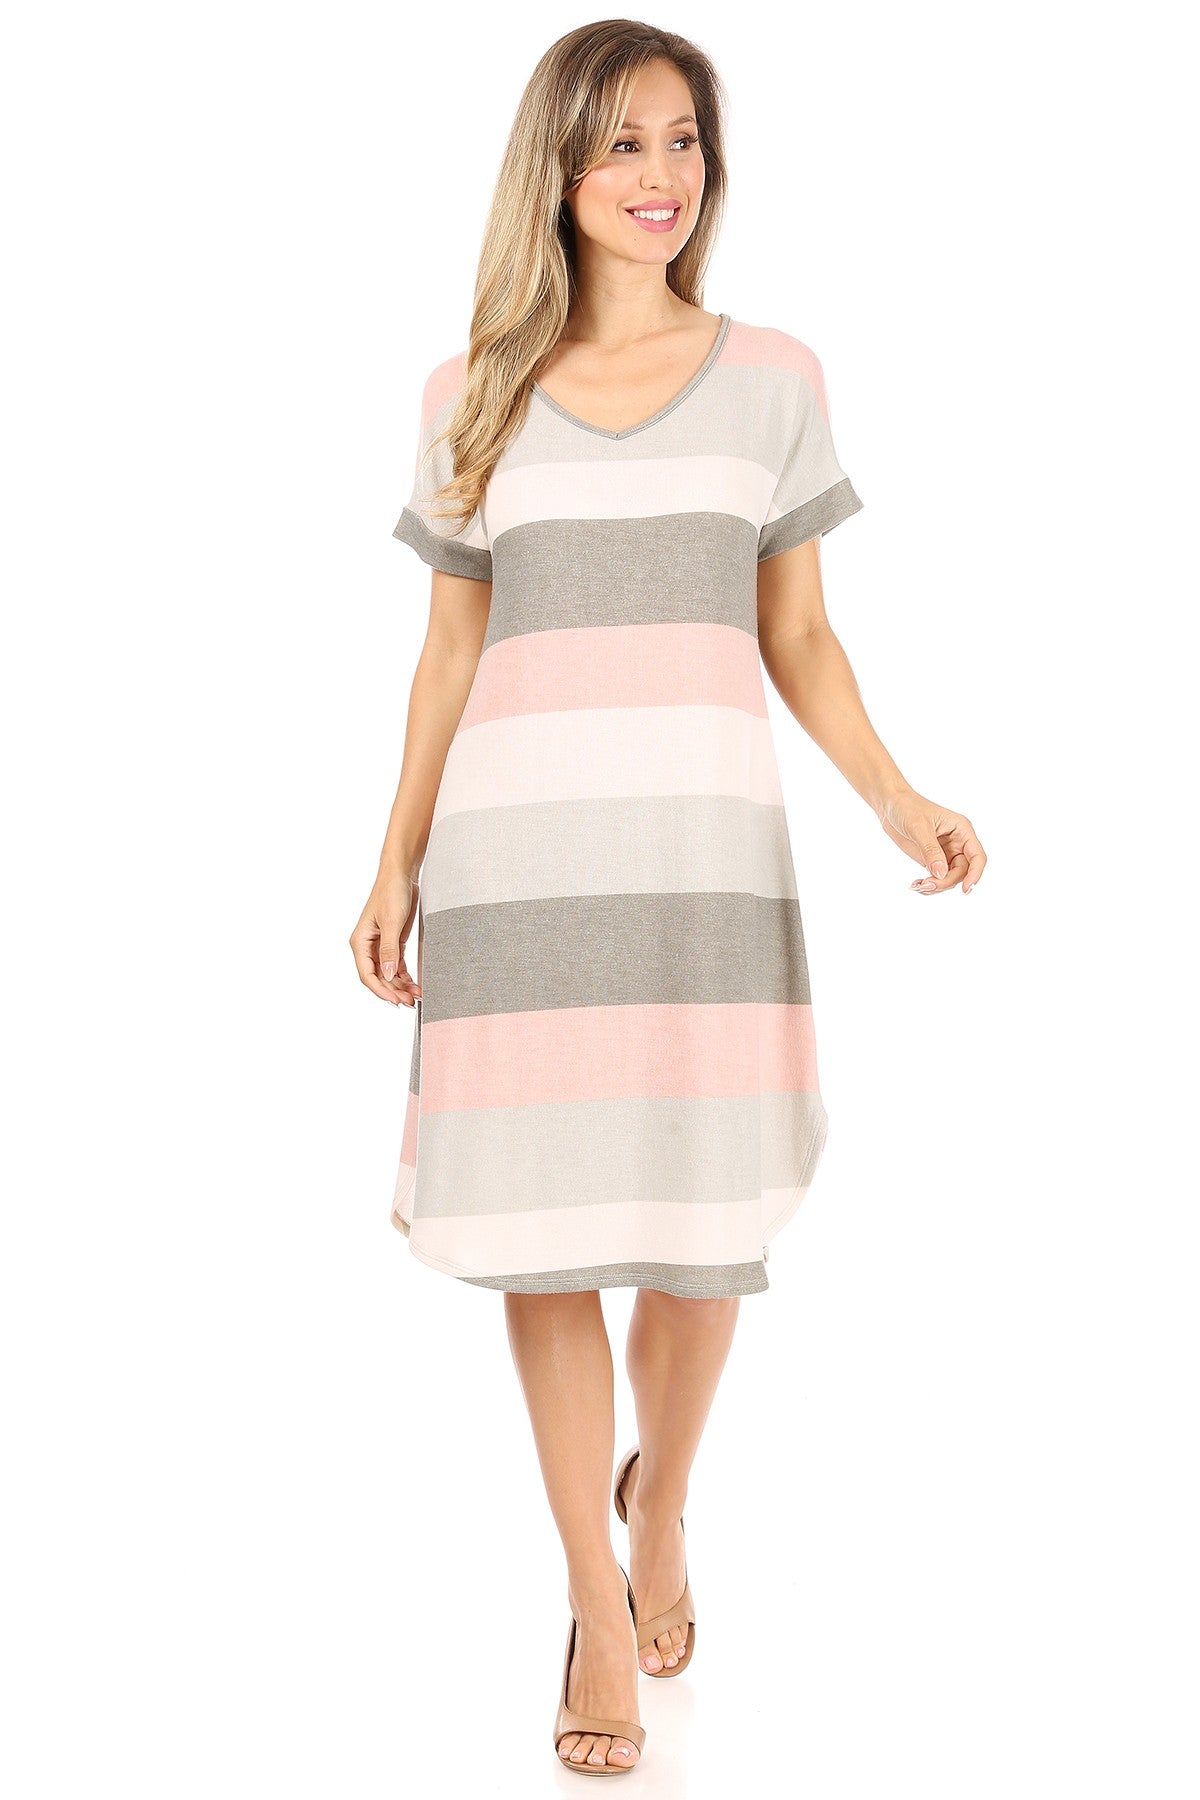 Peach and Olive Color Blocked Dress